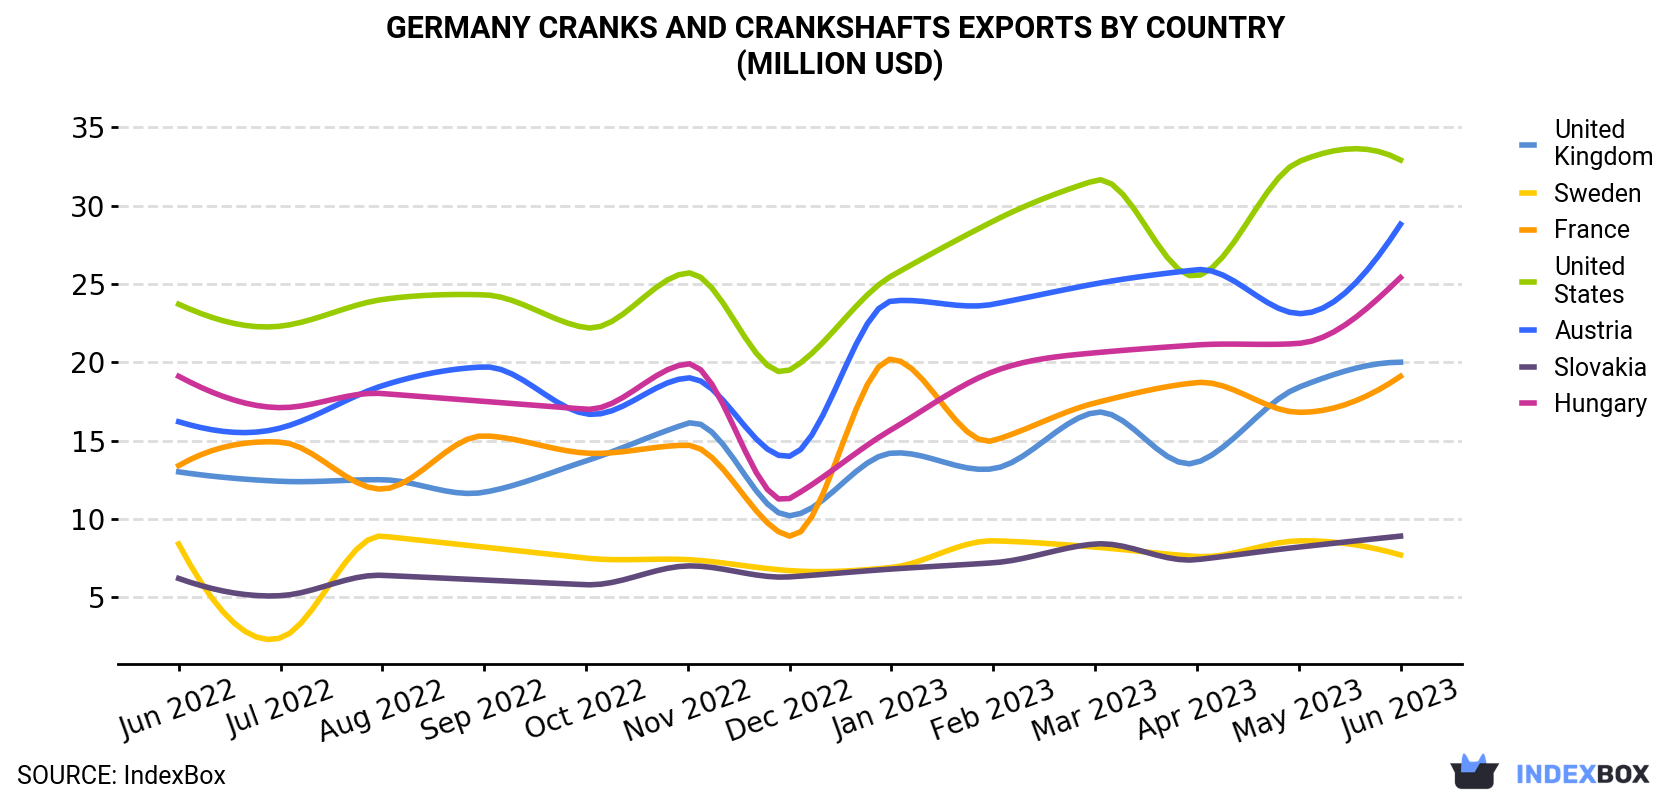 Germany Cranks And Crankshafts Exports By Country (Million USD)